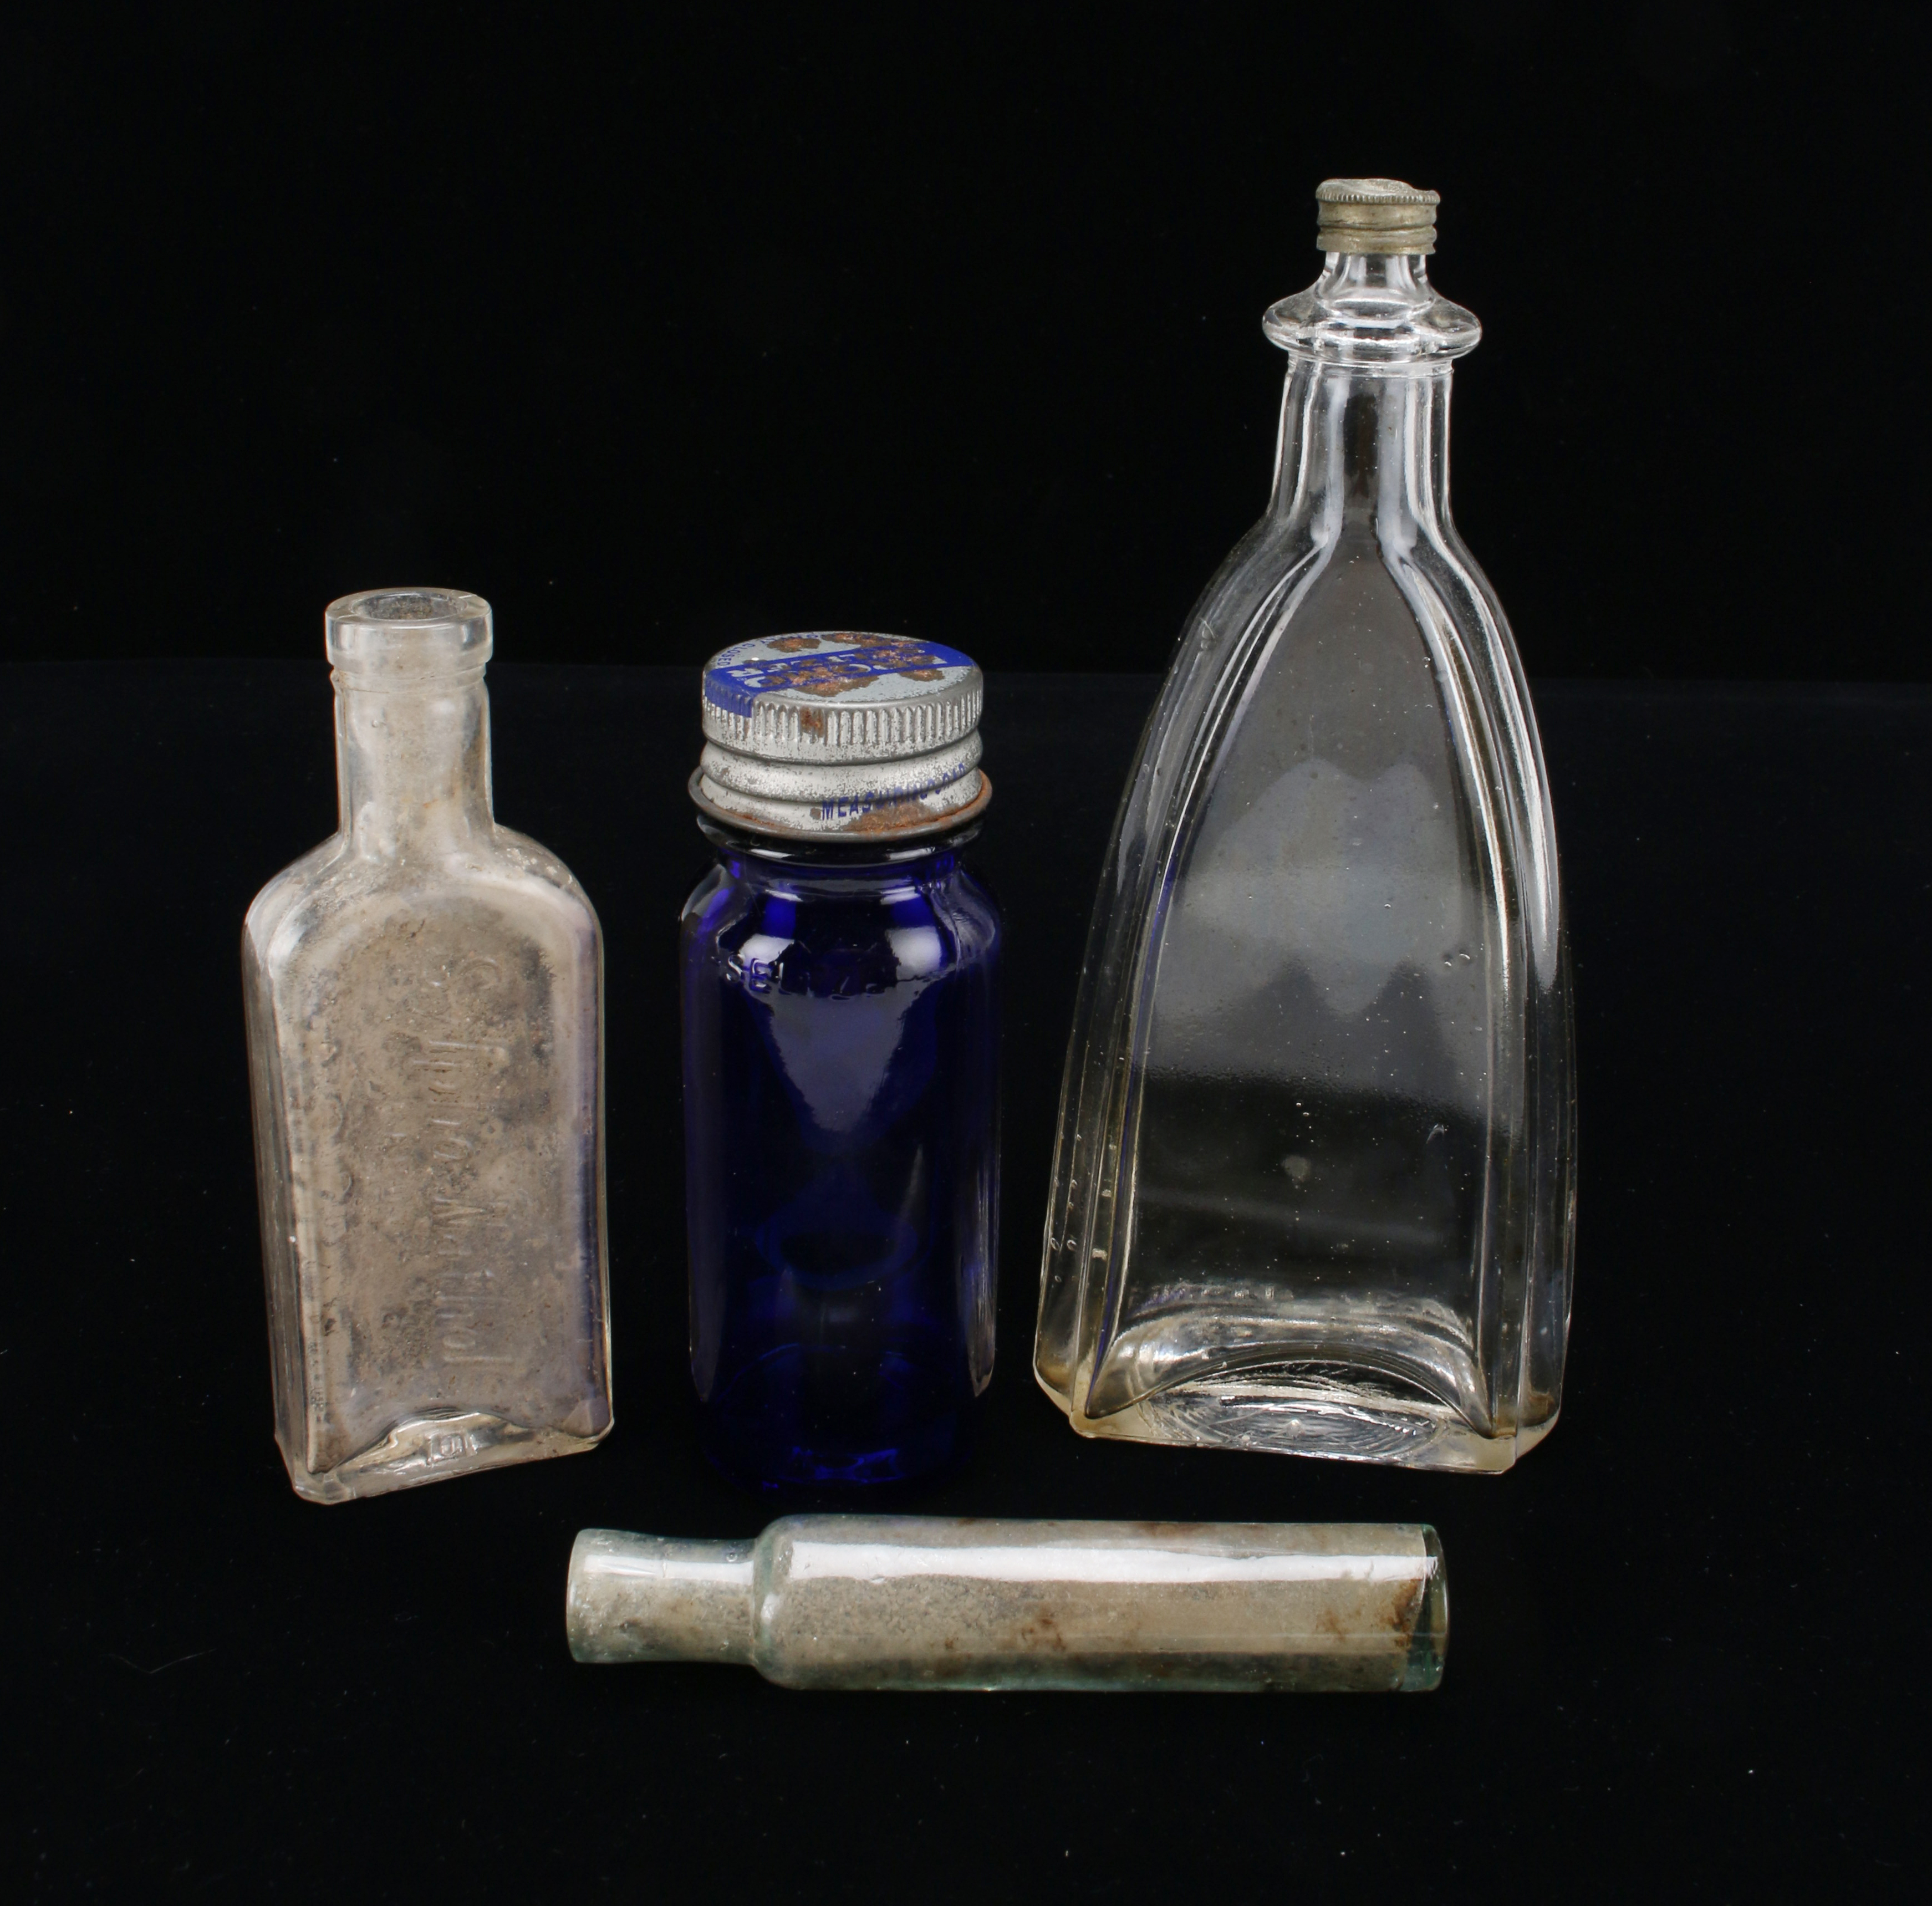 Vintage Apothecary Bottles & Vial image 2